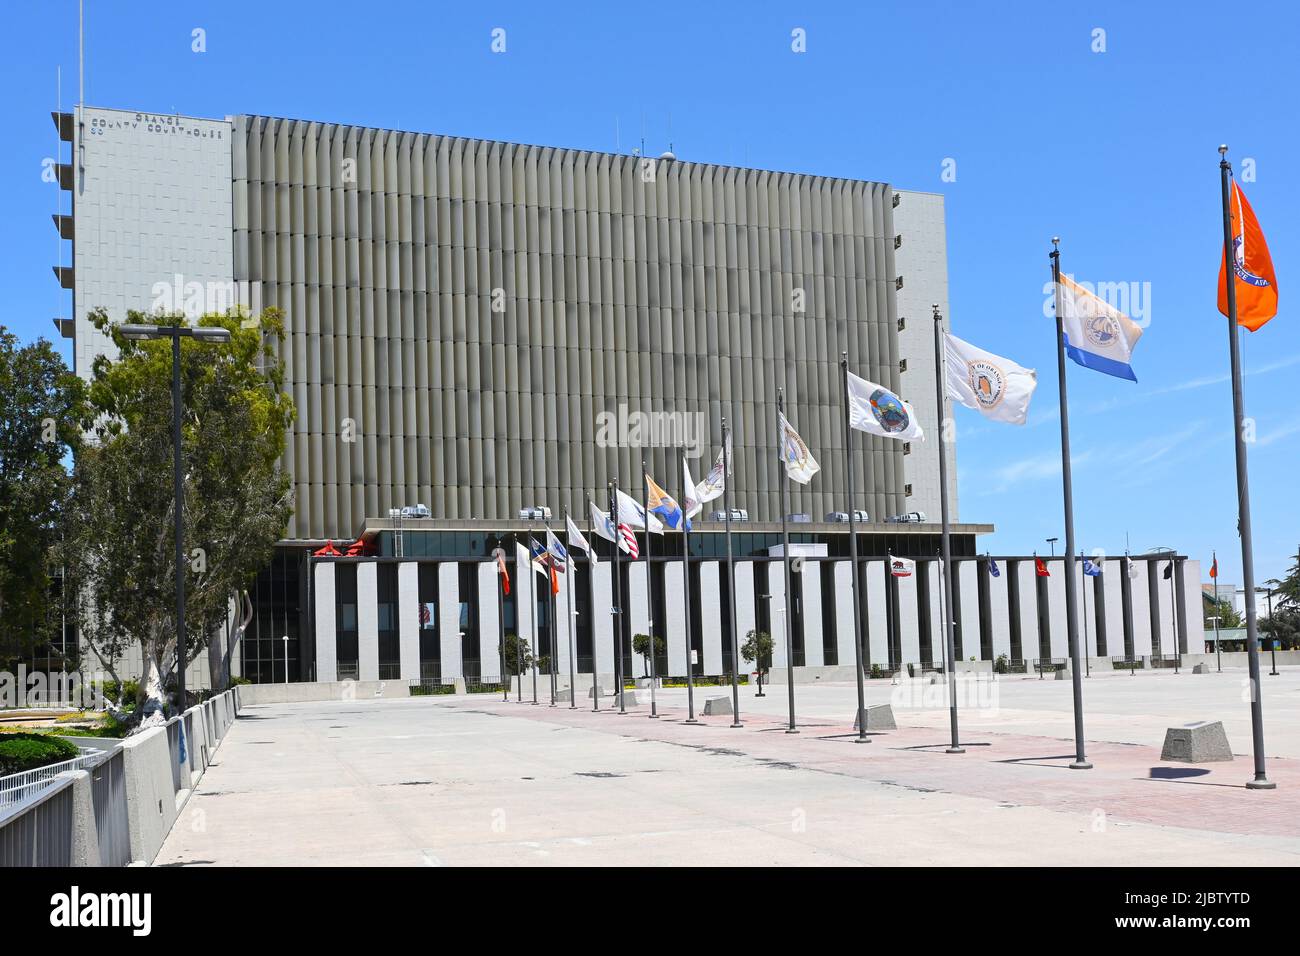 SANTA ANA, CALIFORNIA - 2 JUNE 2022: The Orange County Courthouse and city flags in the Civic Center Plaza. Stock Photo